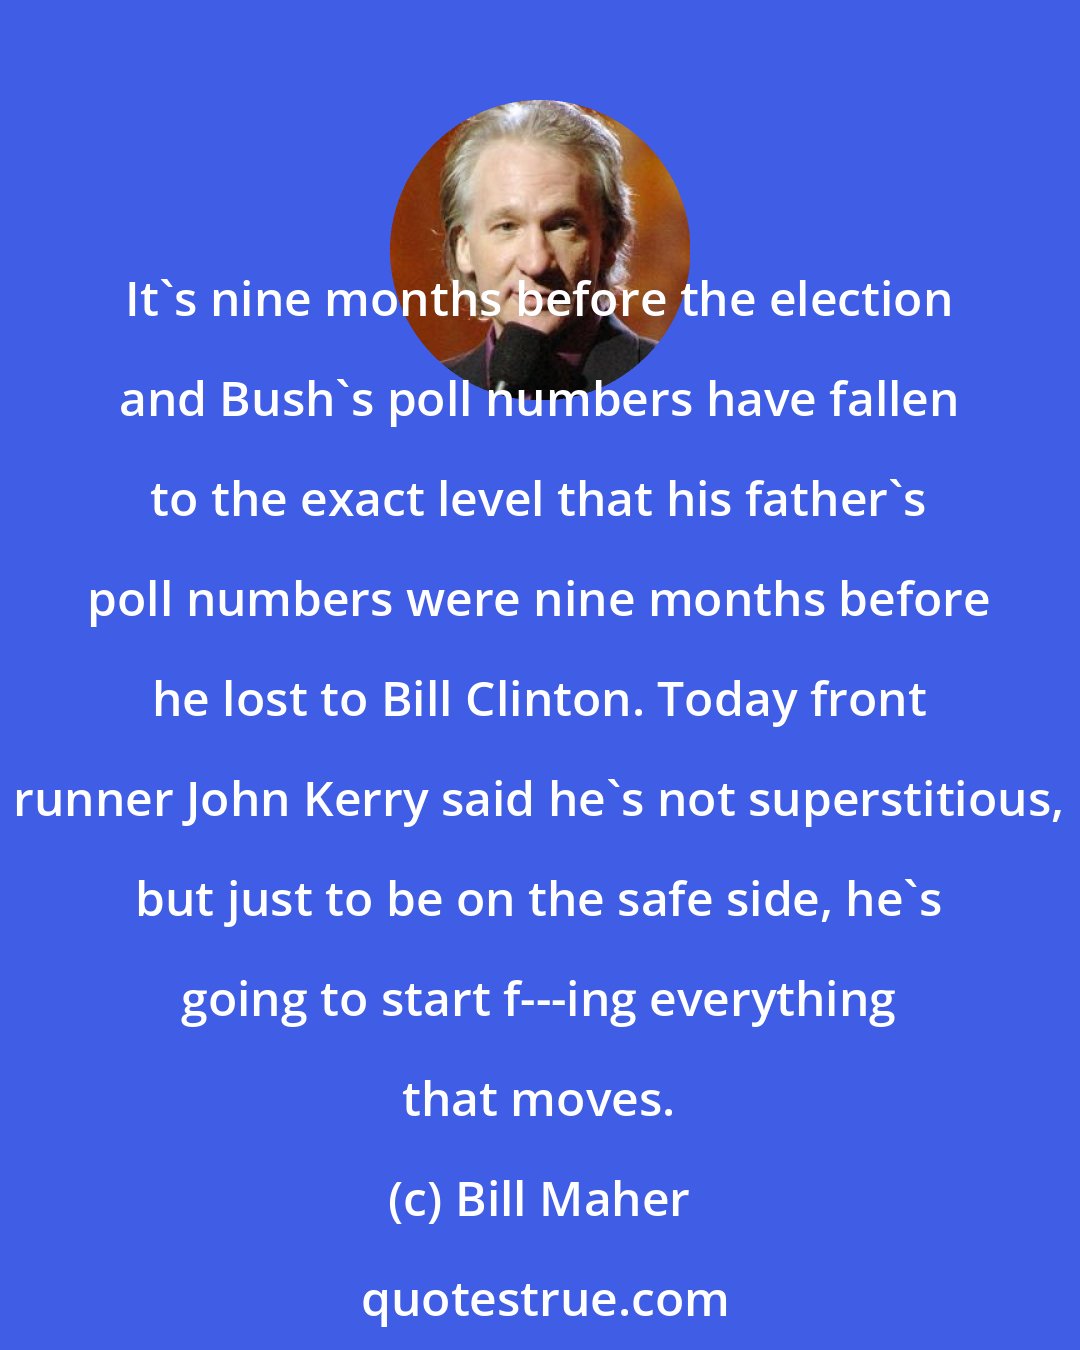 Bill Maher: It's nine months before the election and Bush's poll numbers have fallen to the exact level that his father's poll numbers were nine months before he lost to Bill Clinton. Today front runner John Kerry said he's not superstitious, but just to be on the safe side, he's going to start f---ing everything that moves.